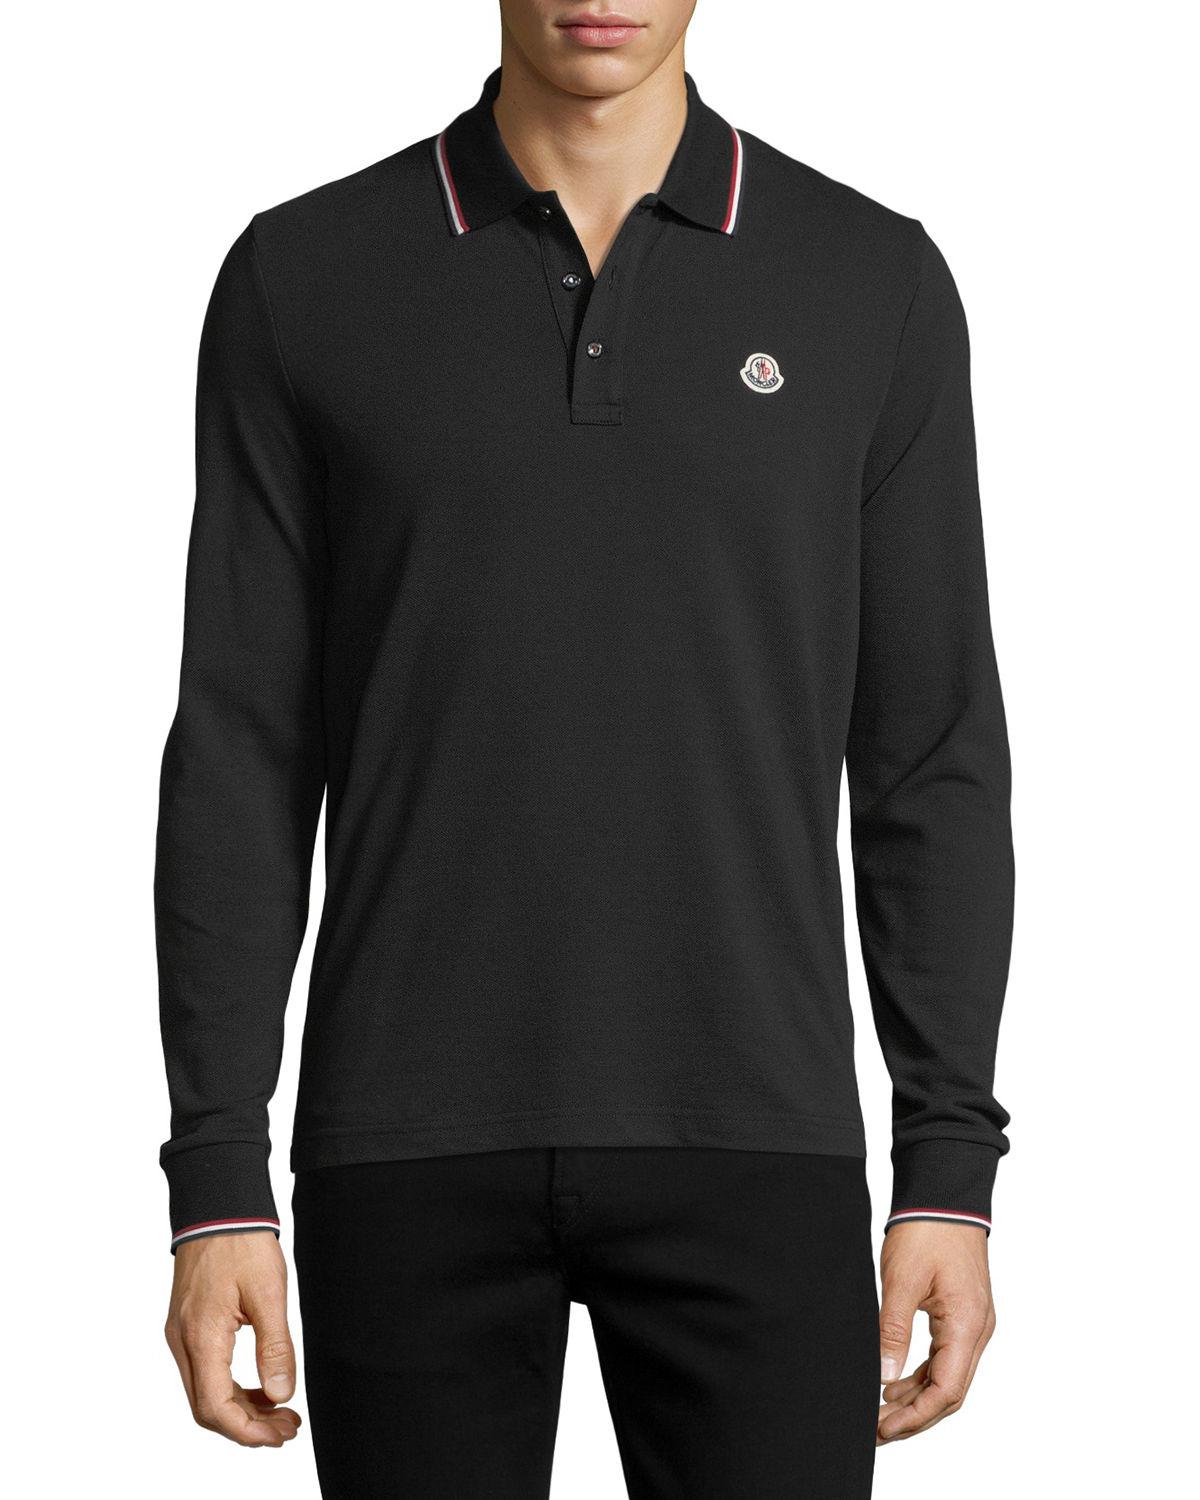 Lyst - Moncler Tipped Long-sleeve Polo Shirt in Black for Men